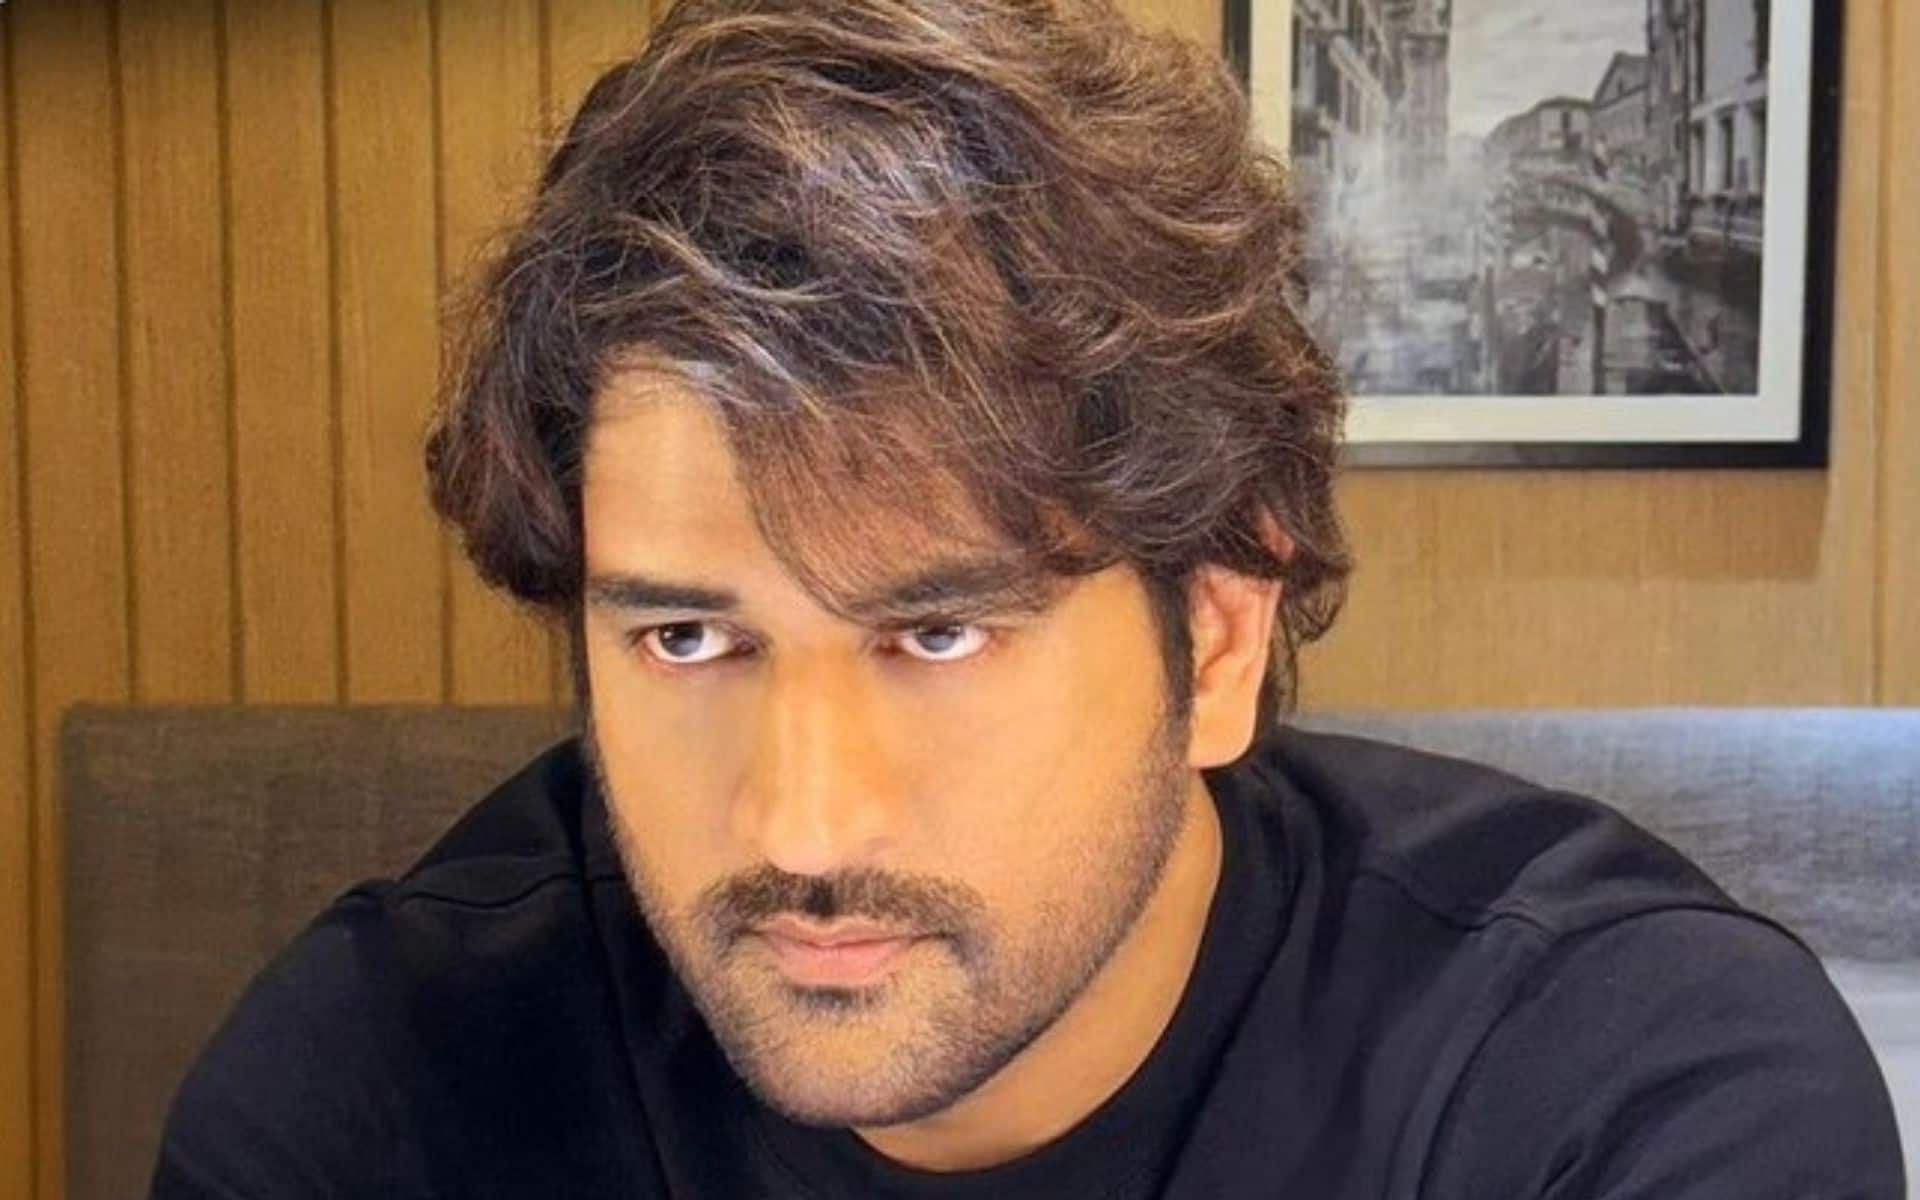 MS Dhoni Shocks Fans Again With A Dapper Twist To His Vintage Hairstyle; Check Viral Pic